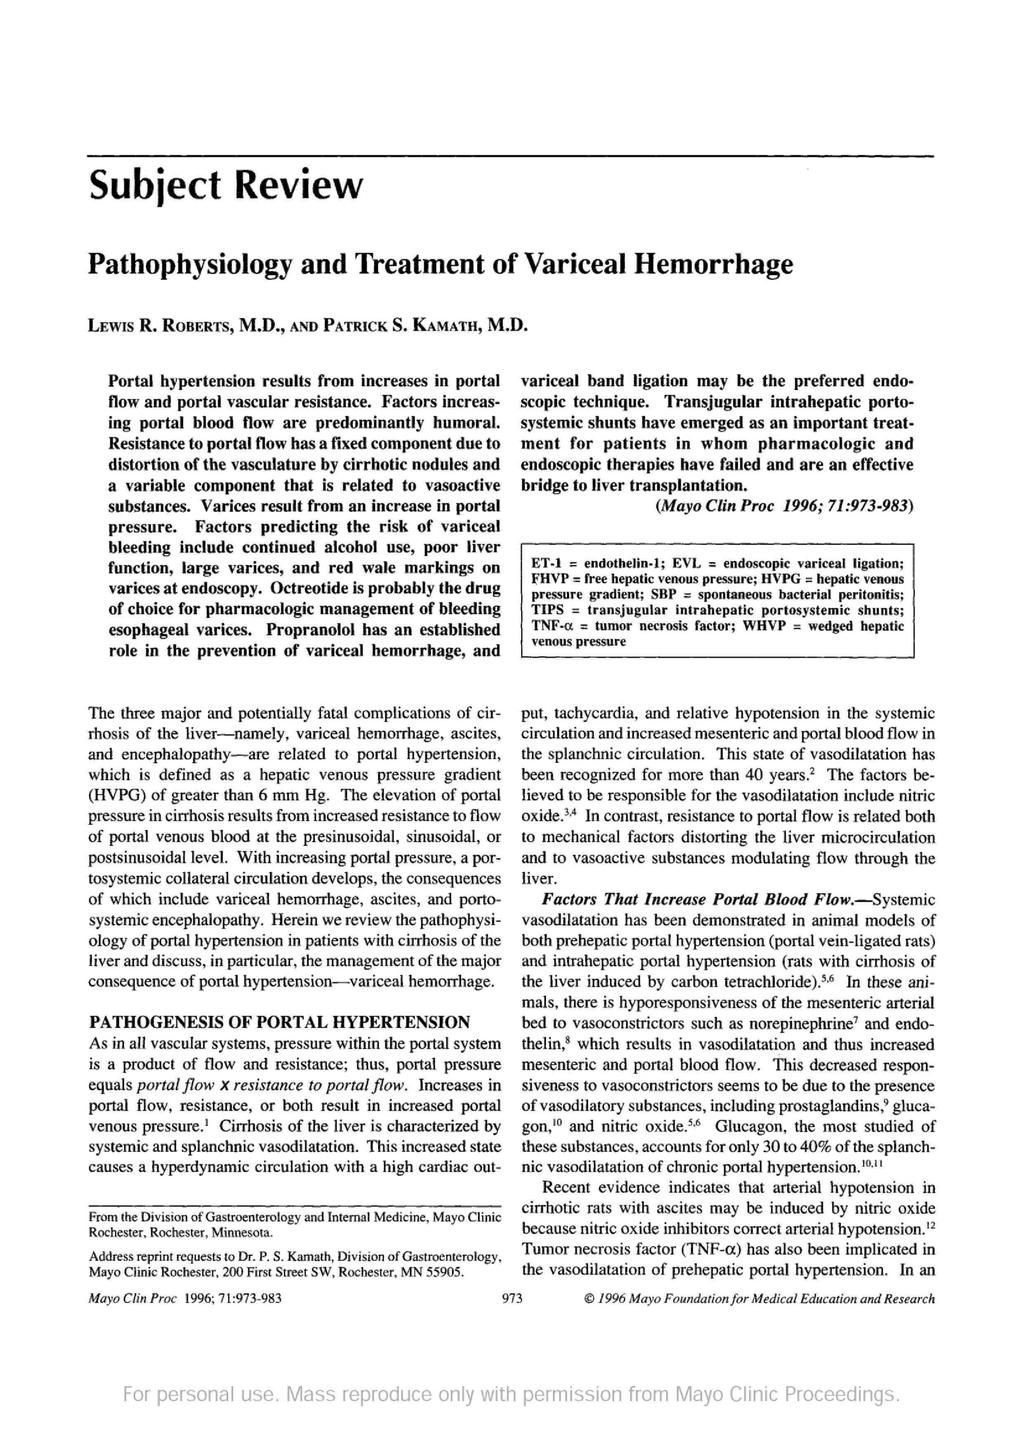 Subject Review Pathophysiology and Treatment of Variceal Hemorrhage LEWIS R. ROBERTS, M.D., AND PATRICK S. KAMATH, M.D. Portal hypertension results from increases in portal flow and portal vascular resistance.